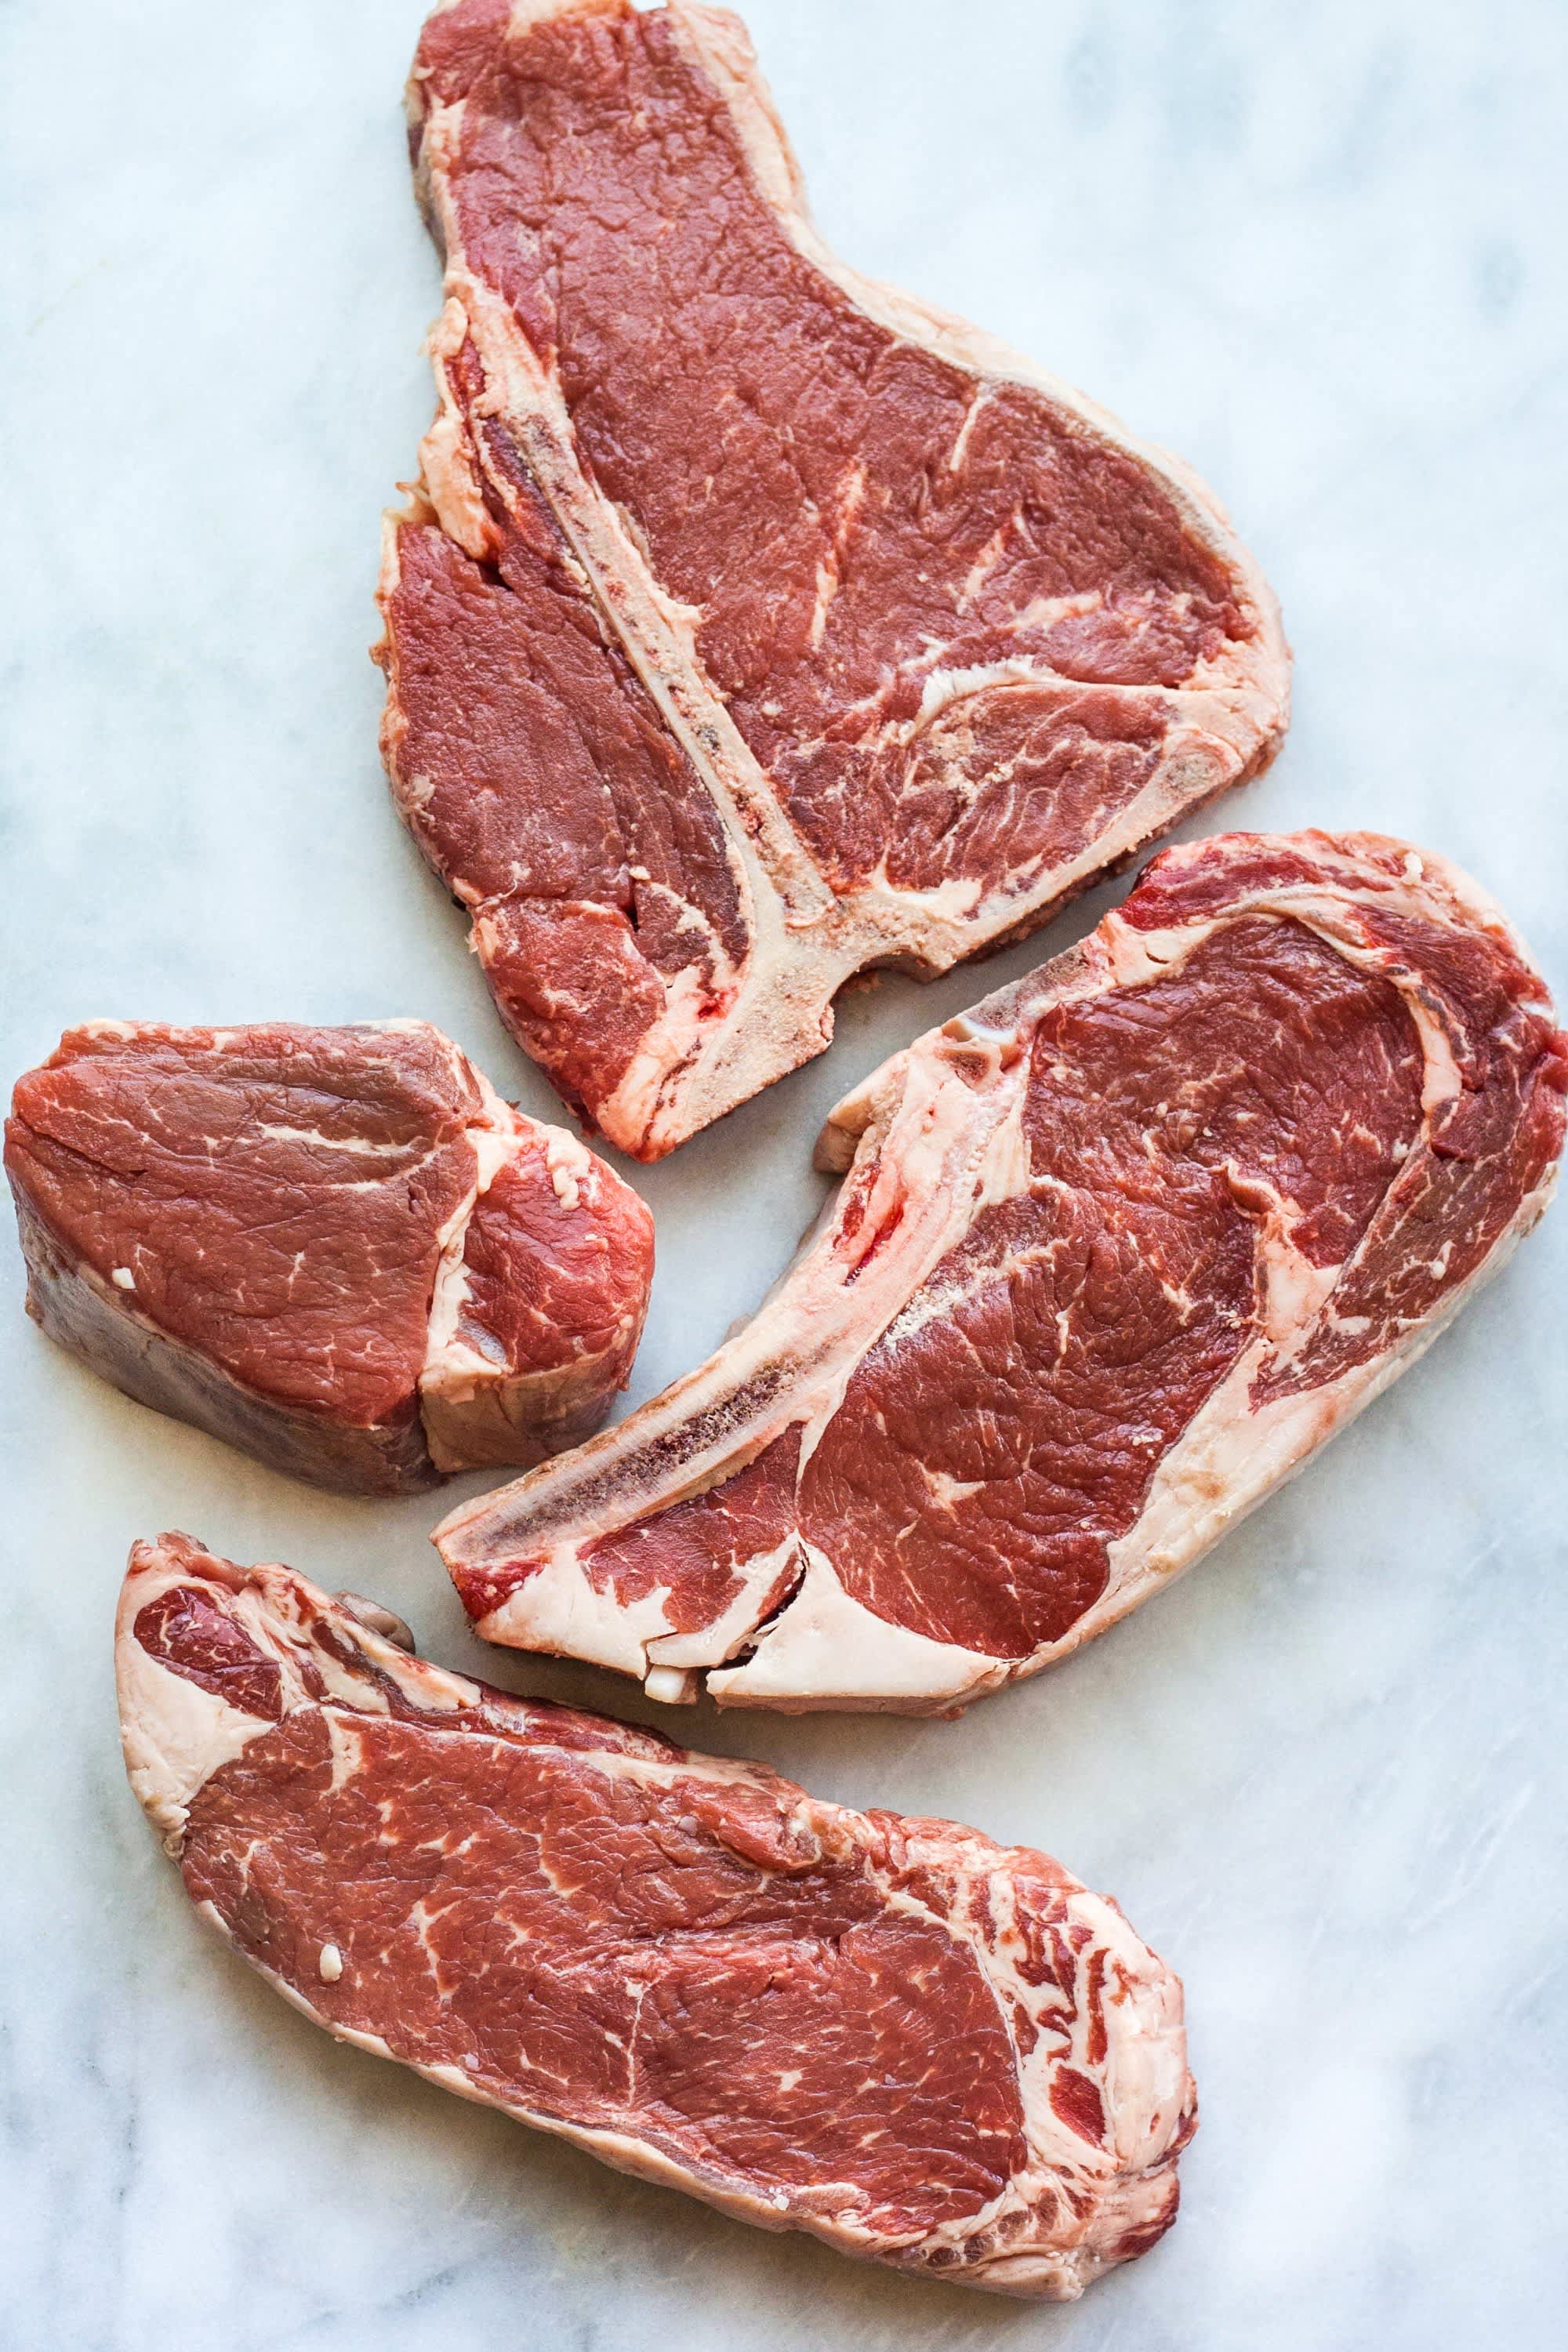 Top Tips For Buying Meat - Steak School by Stanbroke